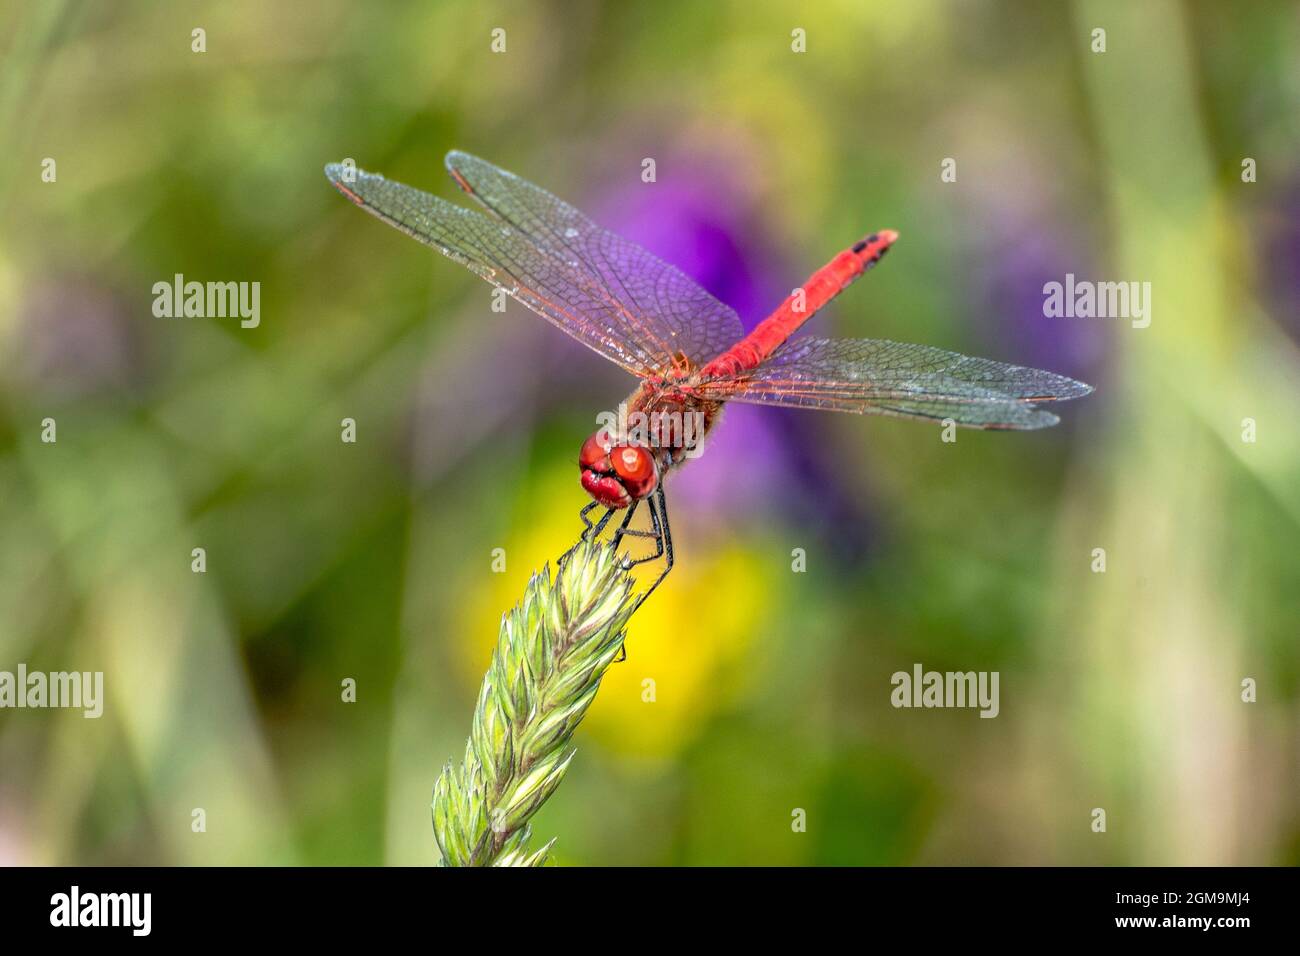 Specimen of red dragonfly posing on a stalk of grass Stock Photo